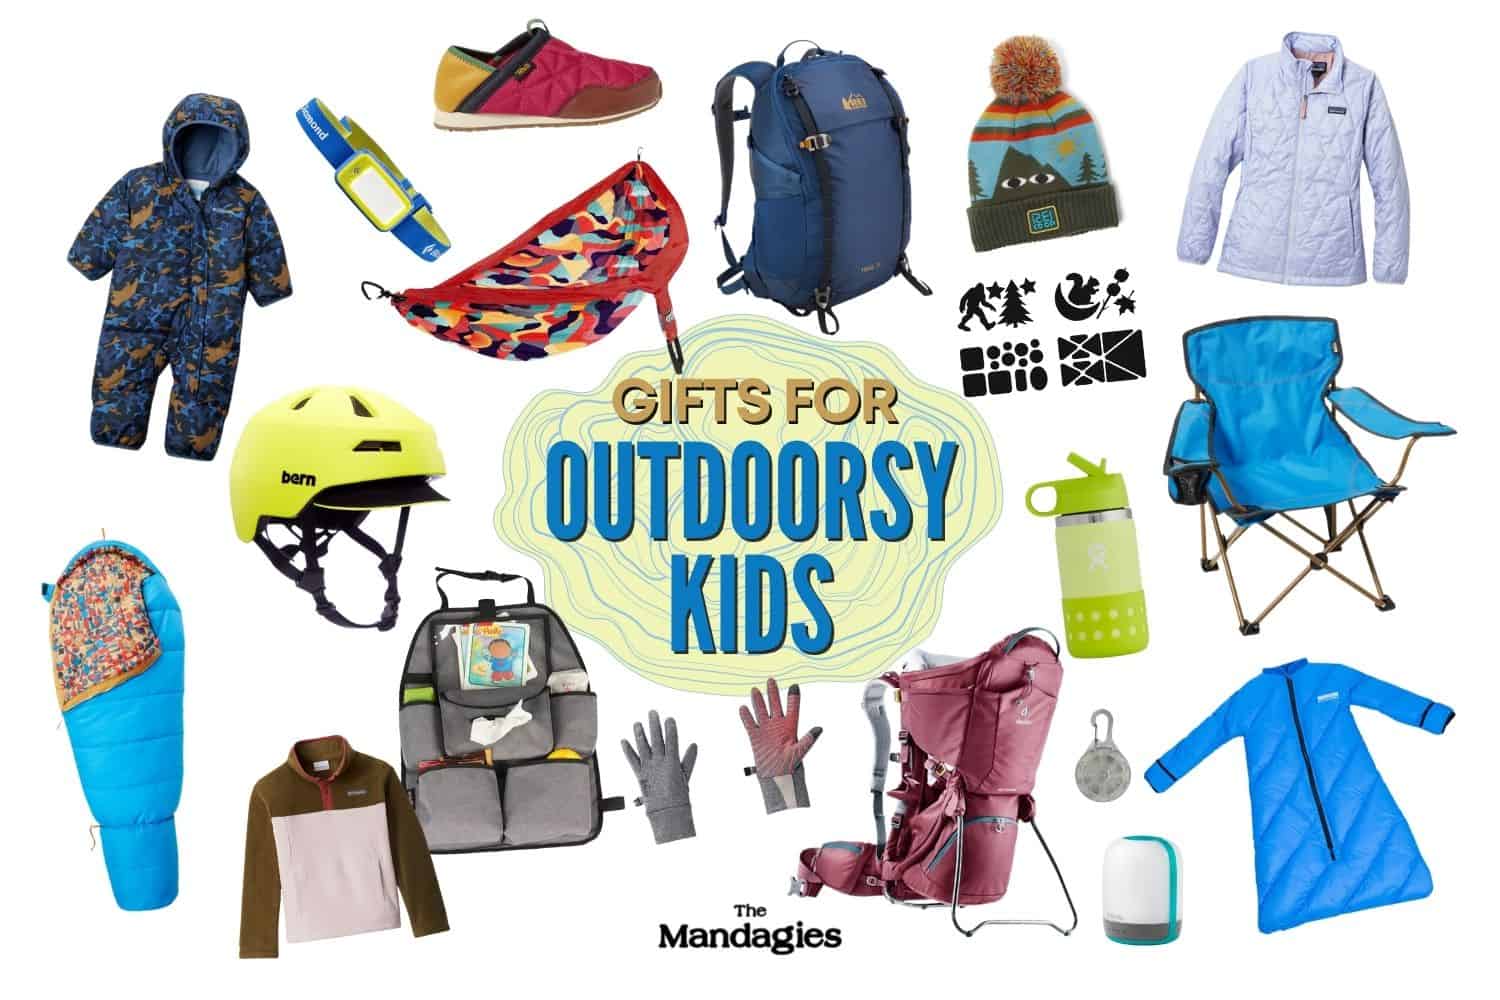 27 Popular Outdoor Gifts For Kids To Empower Curiosity - The Mandagies